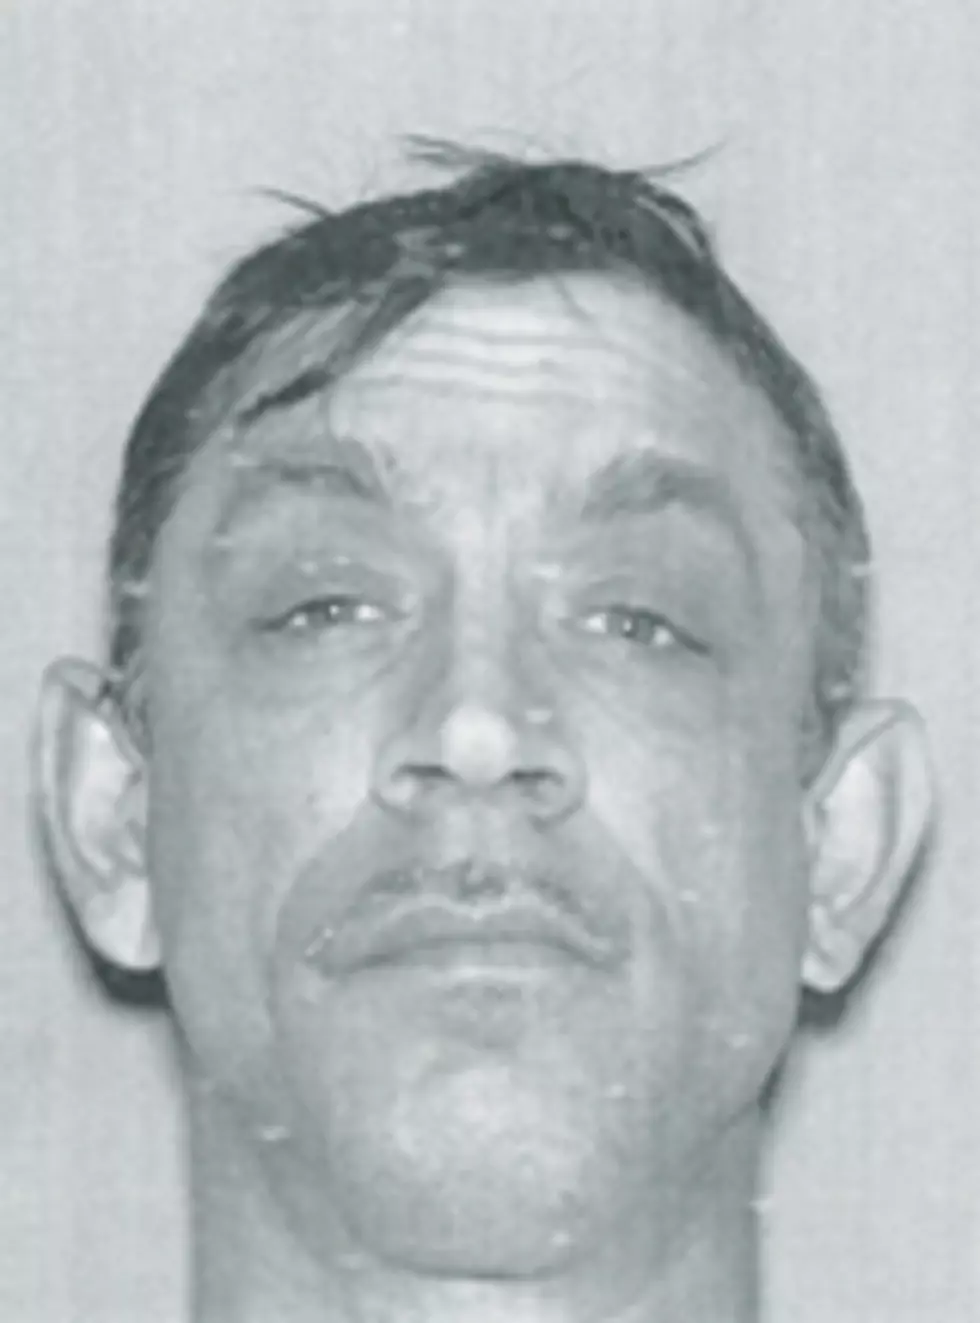 Manchester man wanted for theft in Point Pleasant Borough